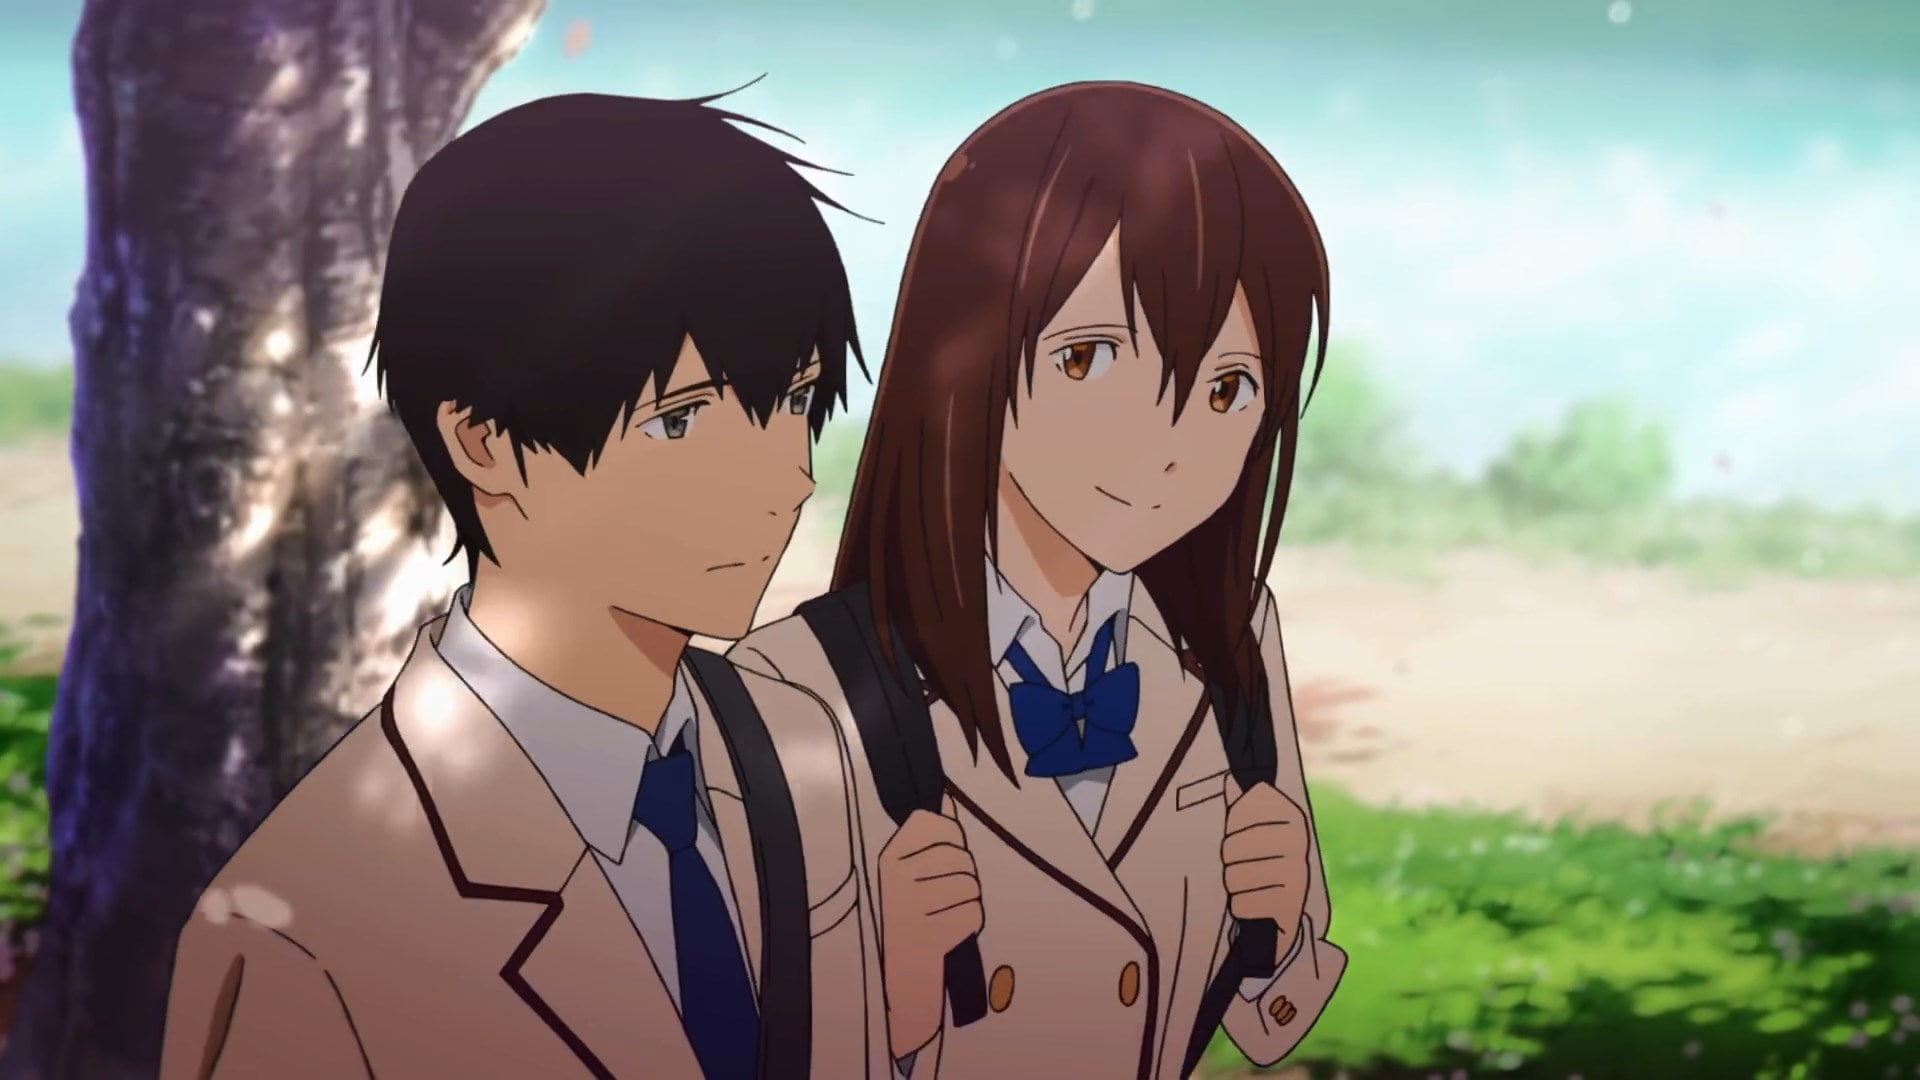 Wallpaper Hd Anime, I Want To Eat Your Pancreas